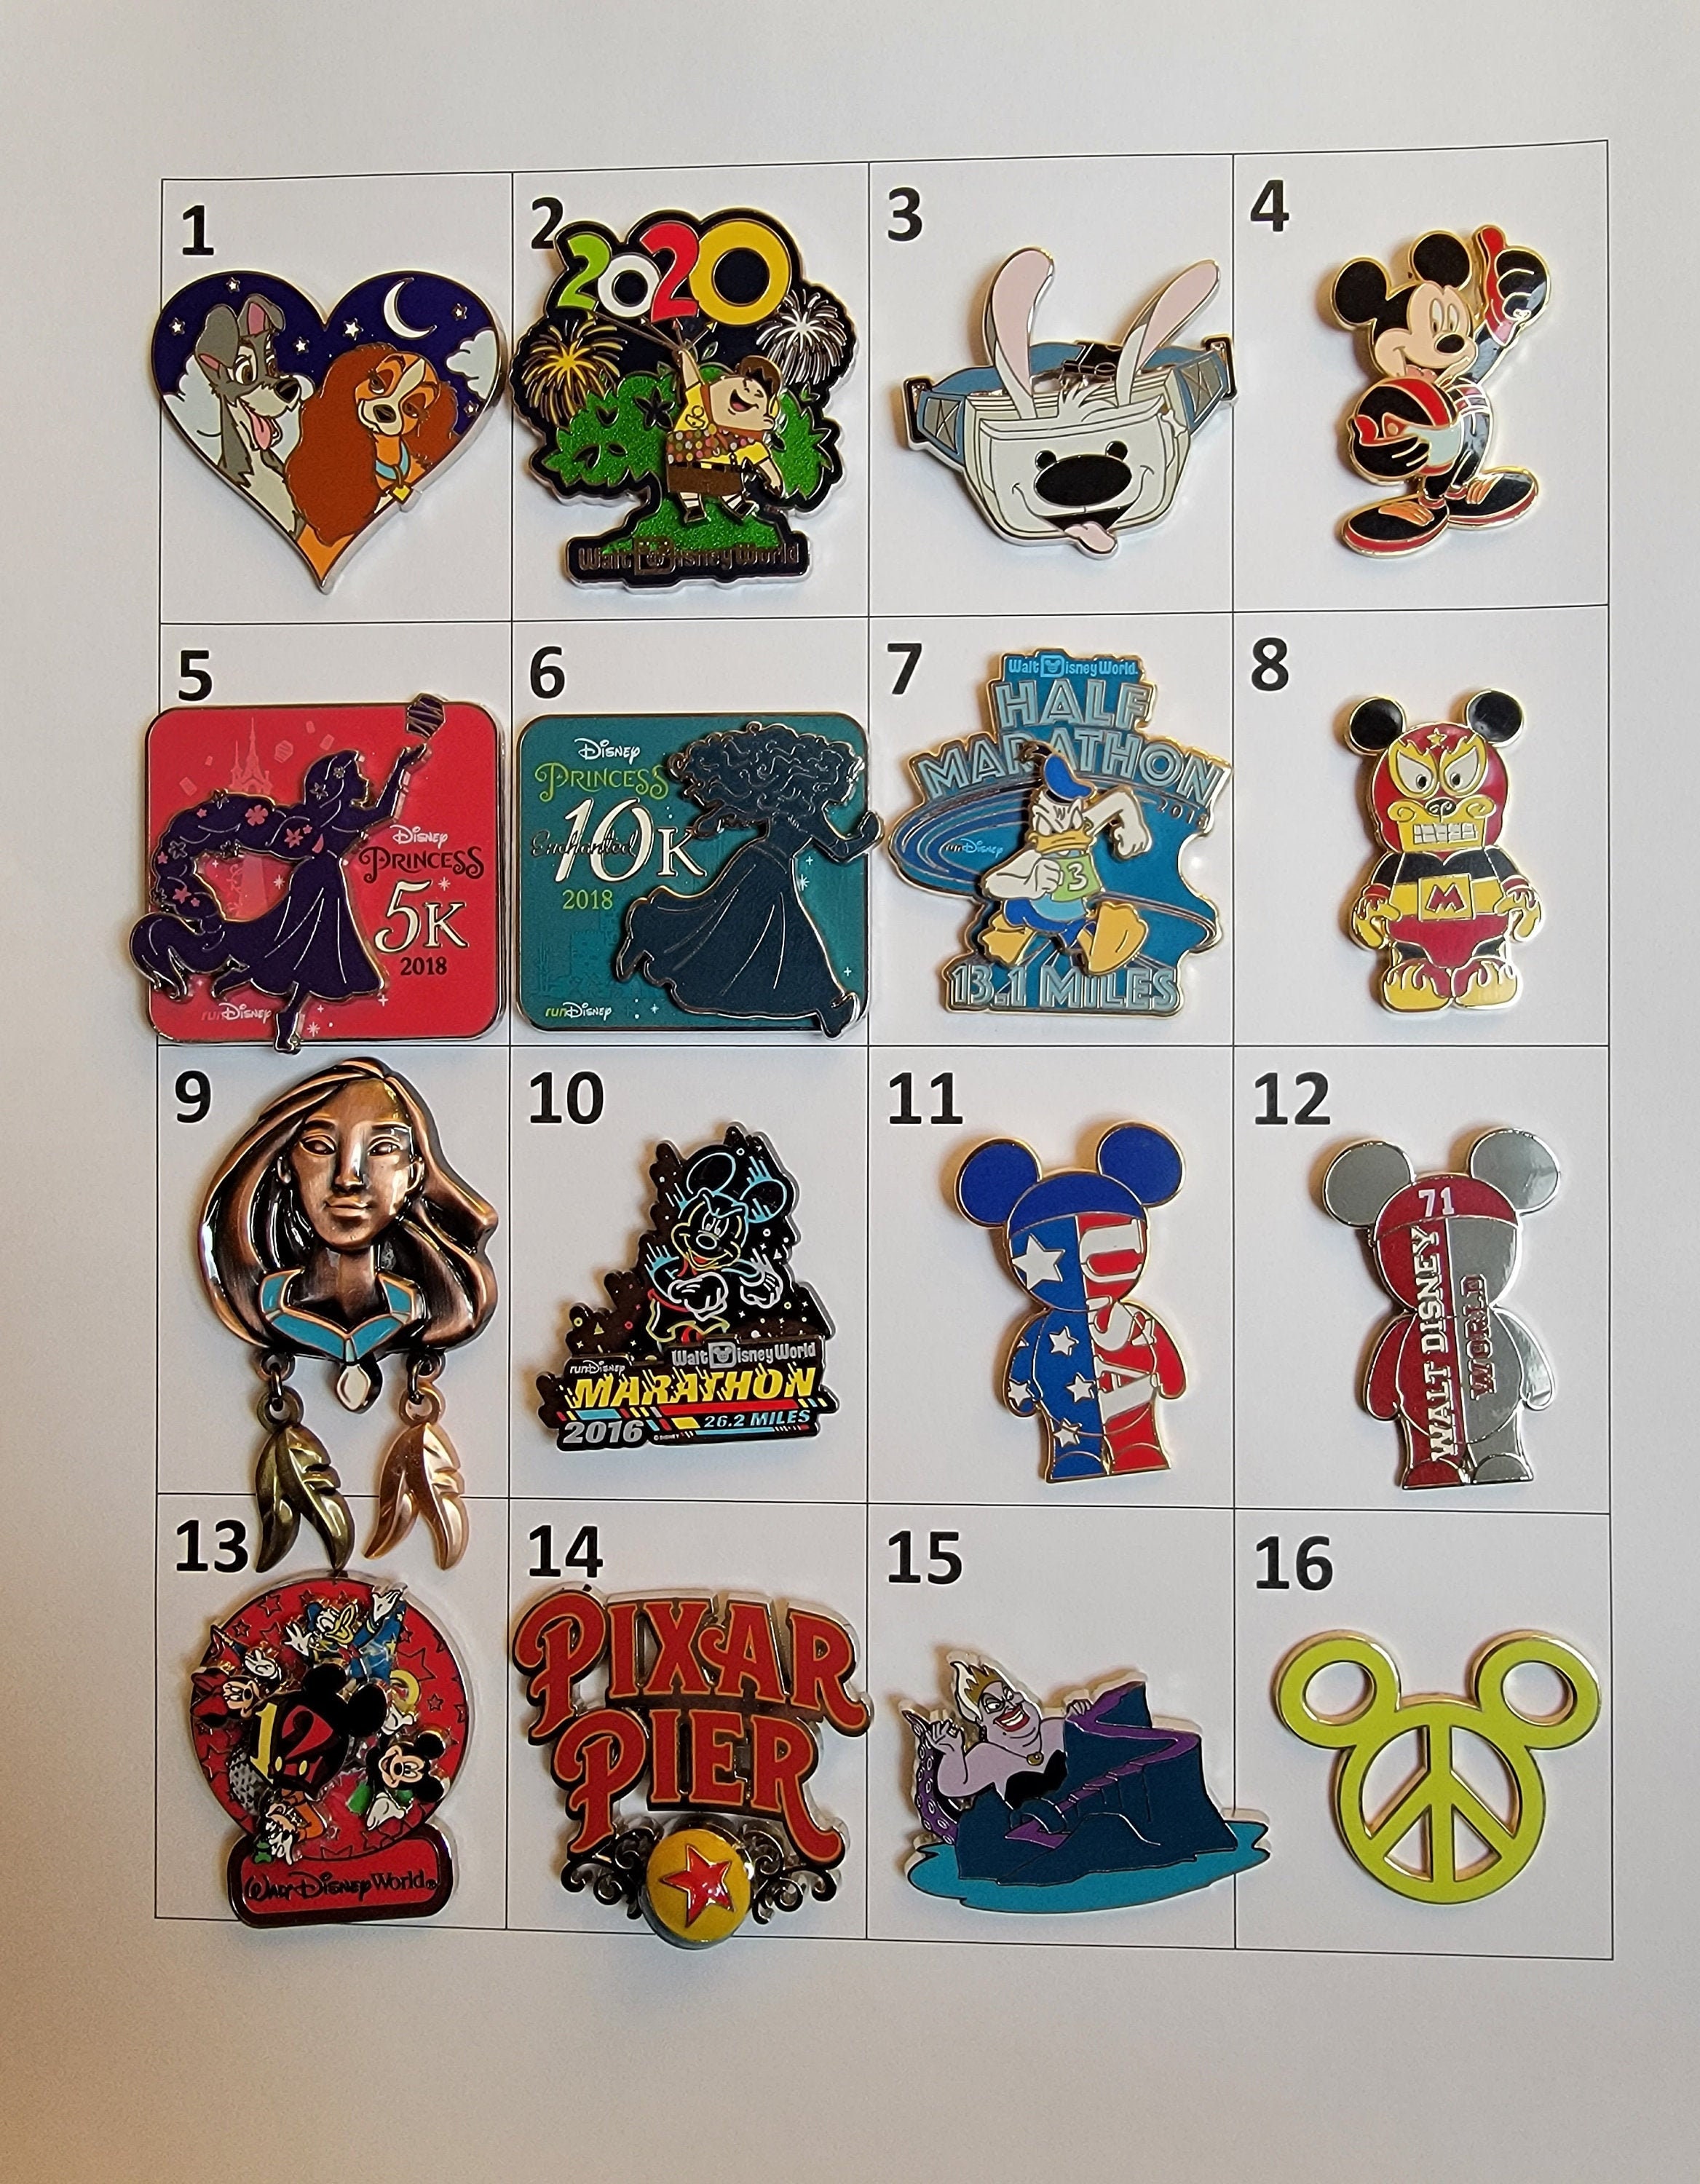 DISNEY Pin Collection w/Book, Vinylmation, Special Events and more!!!! LOT